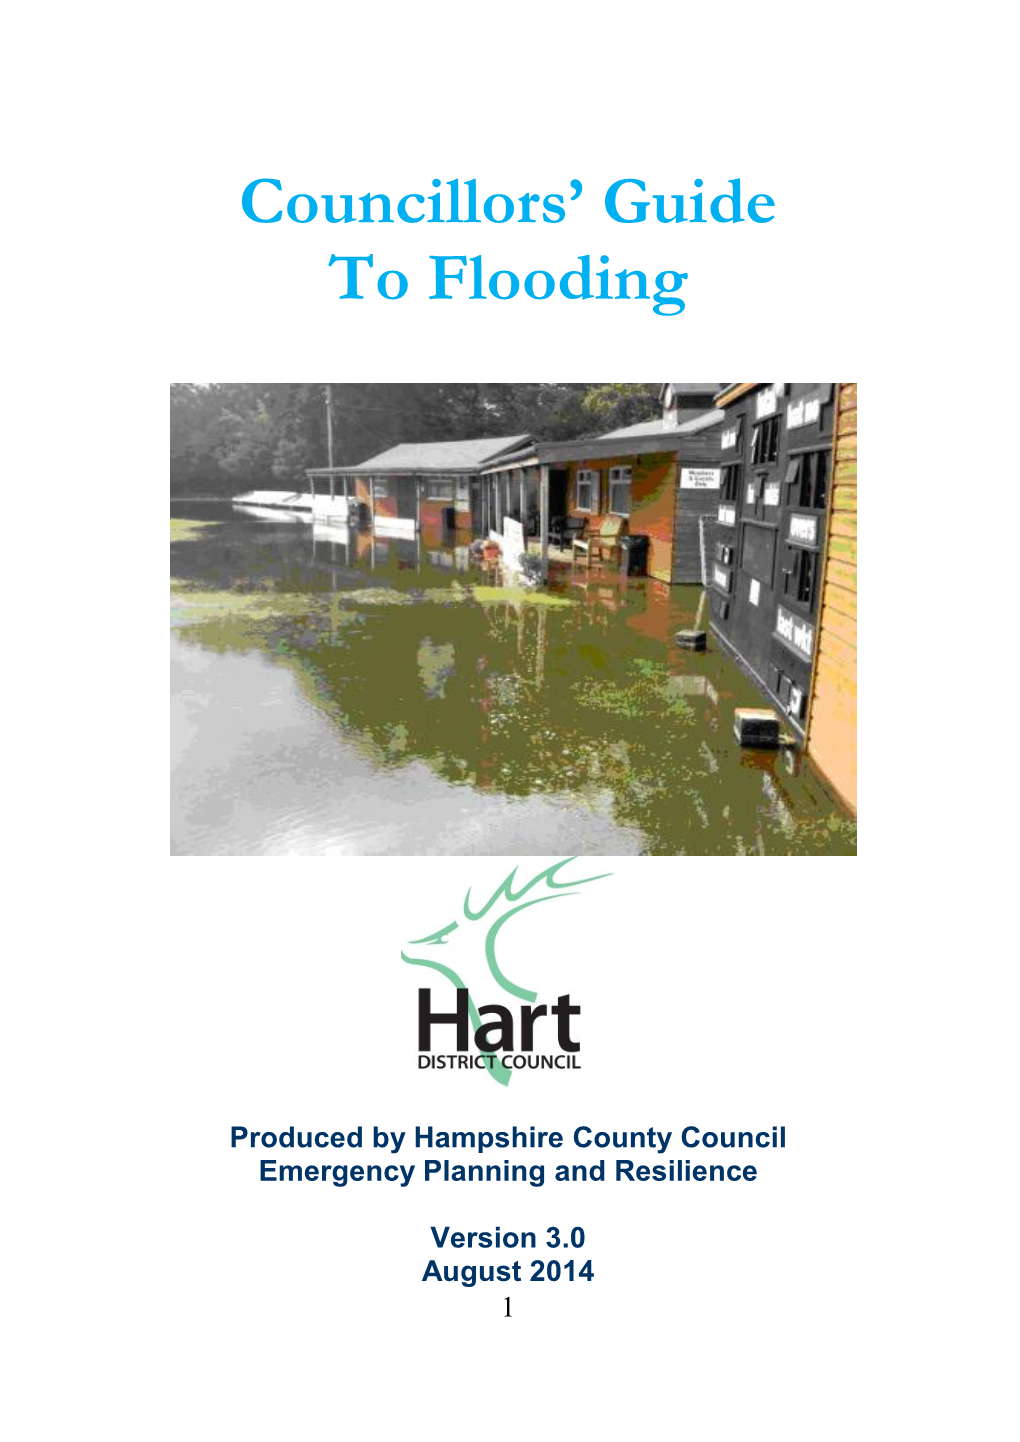 Councillors Guide to Flooding